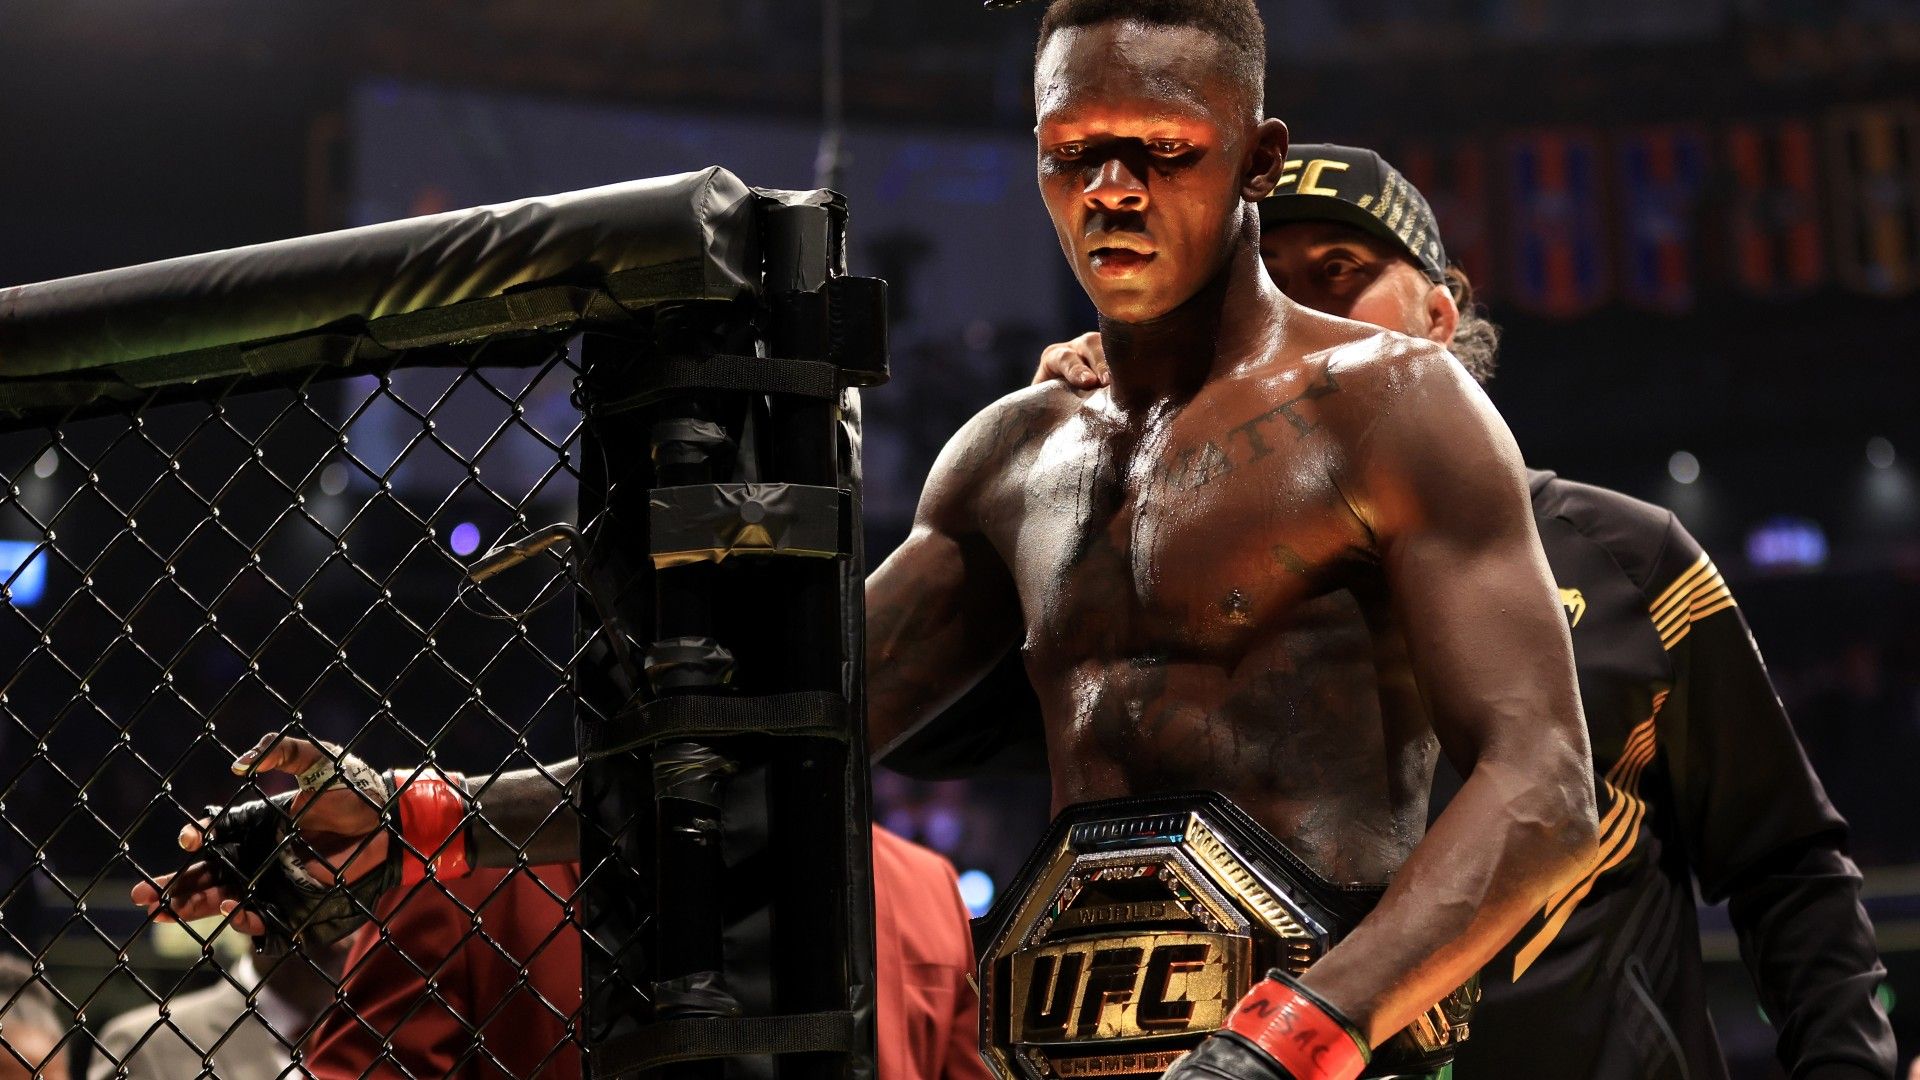 Israel Adesanya beats Jared Cannonier, called out Alex Pereira for next title defence